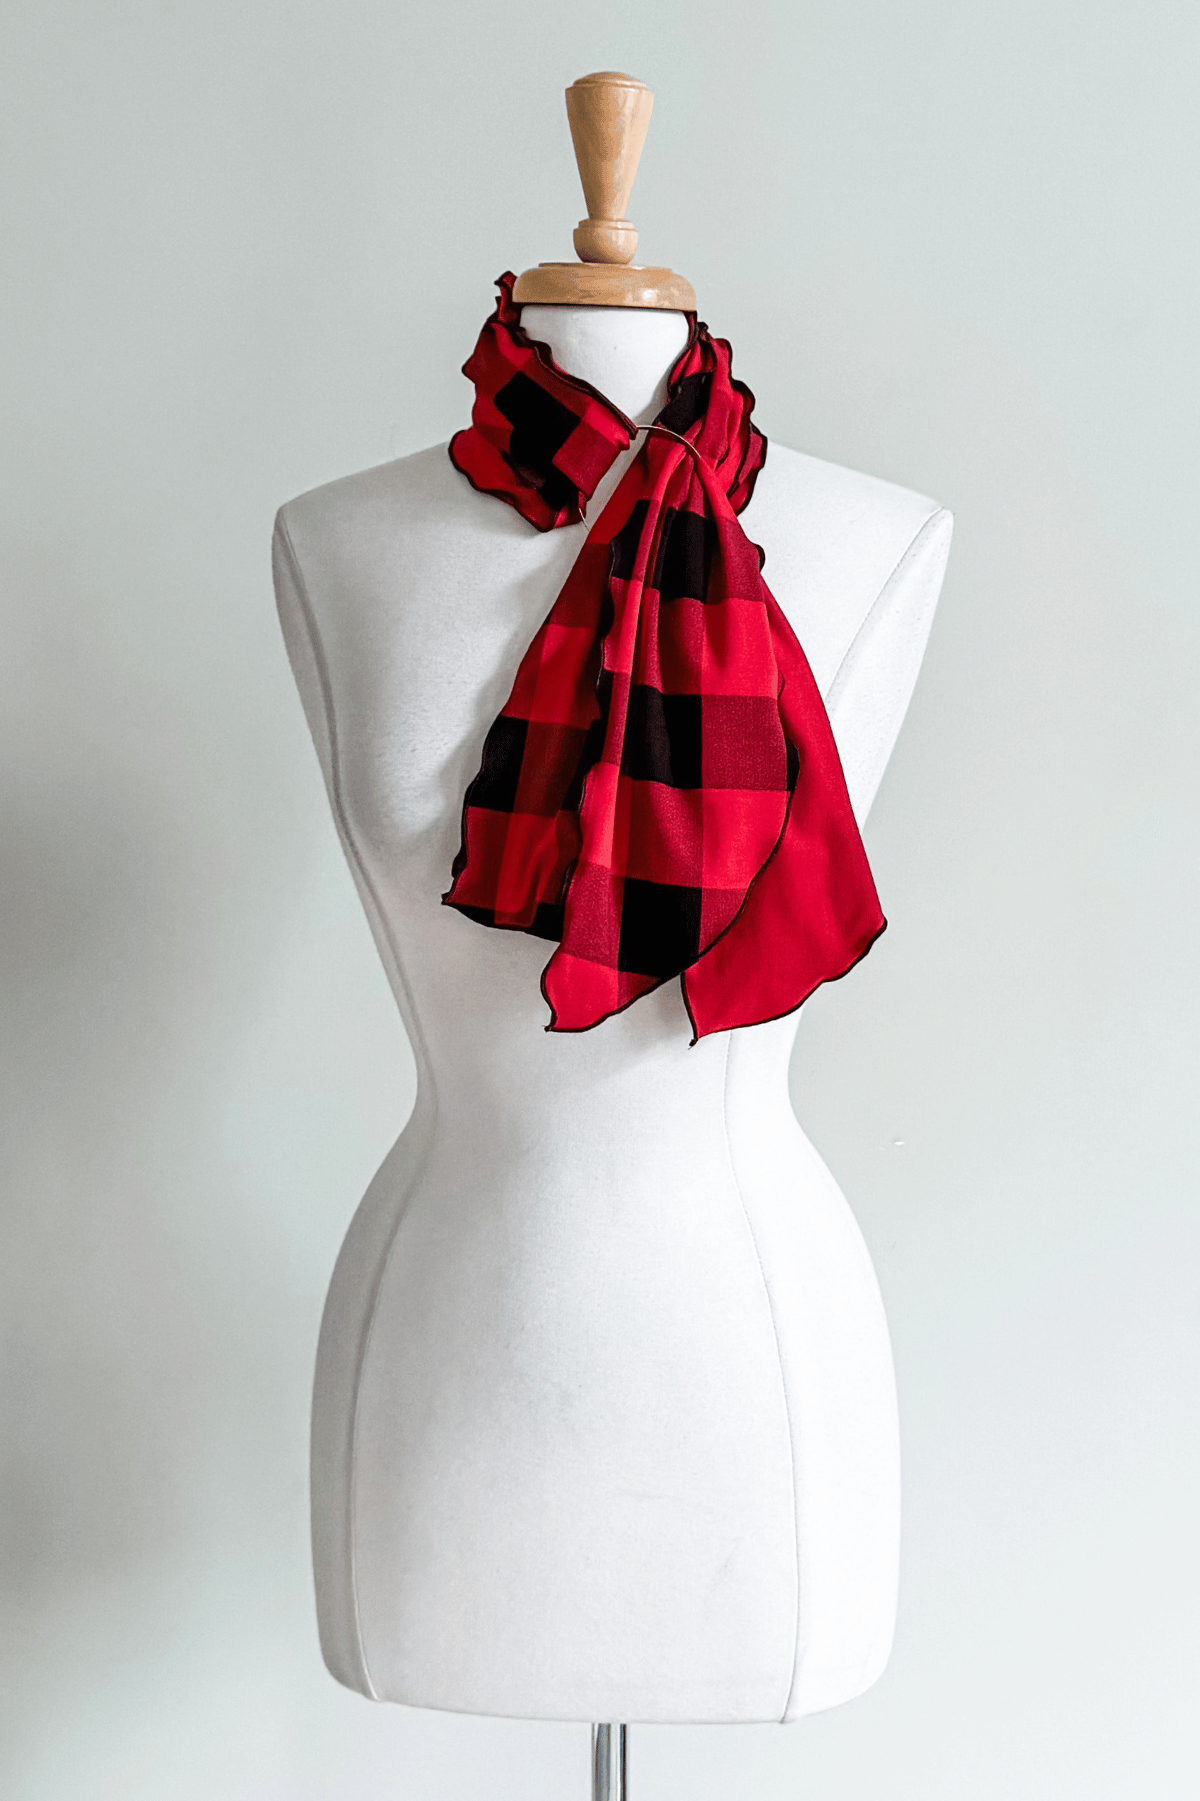 Reversible Sash in Canadiana as a scarf